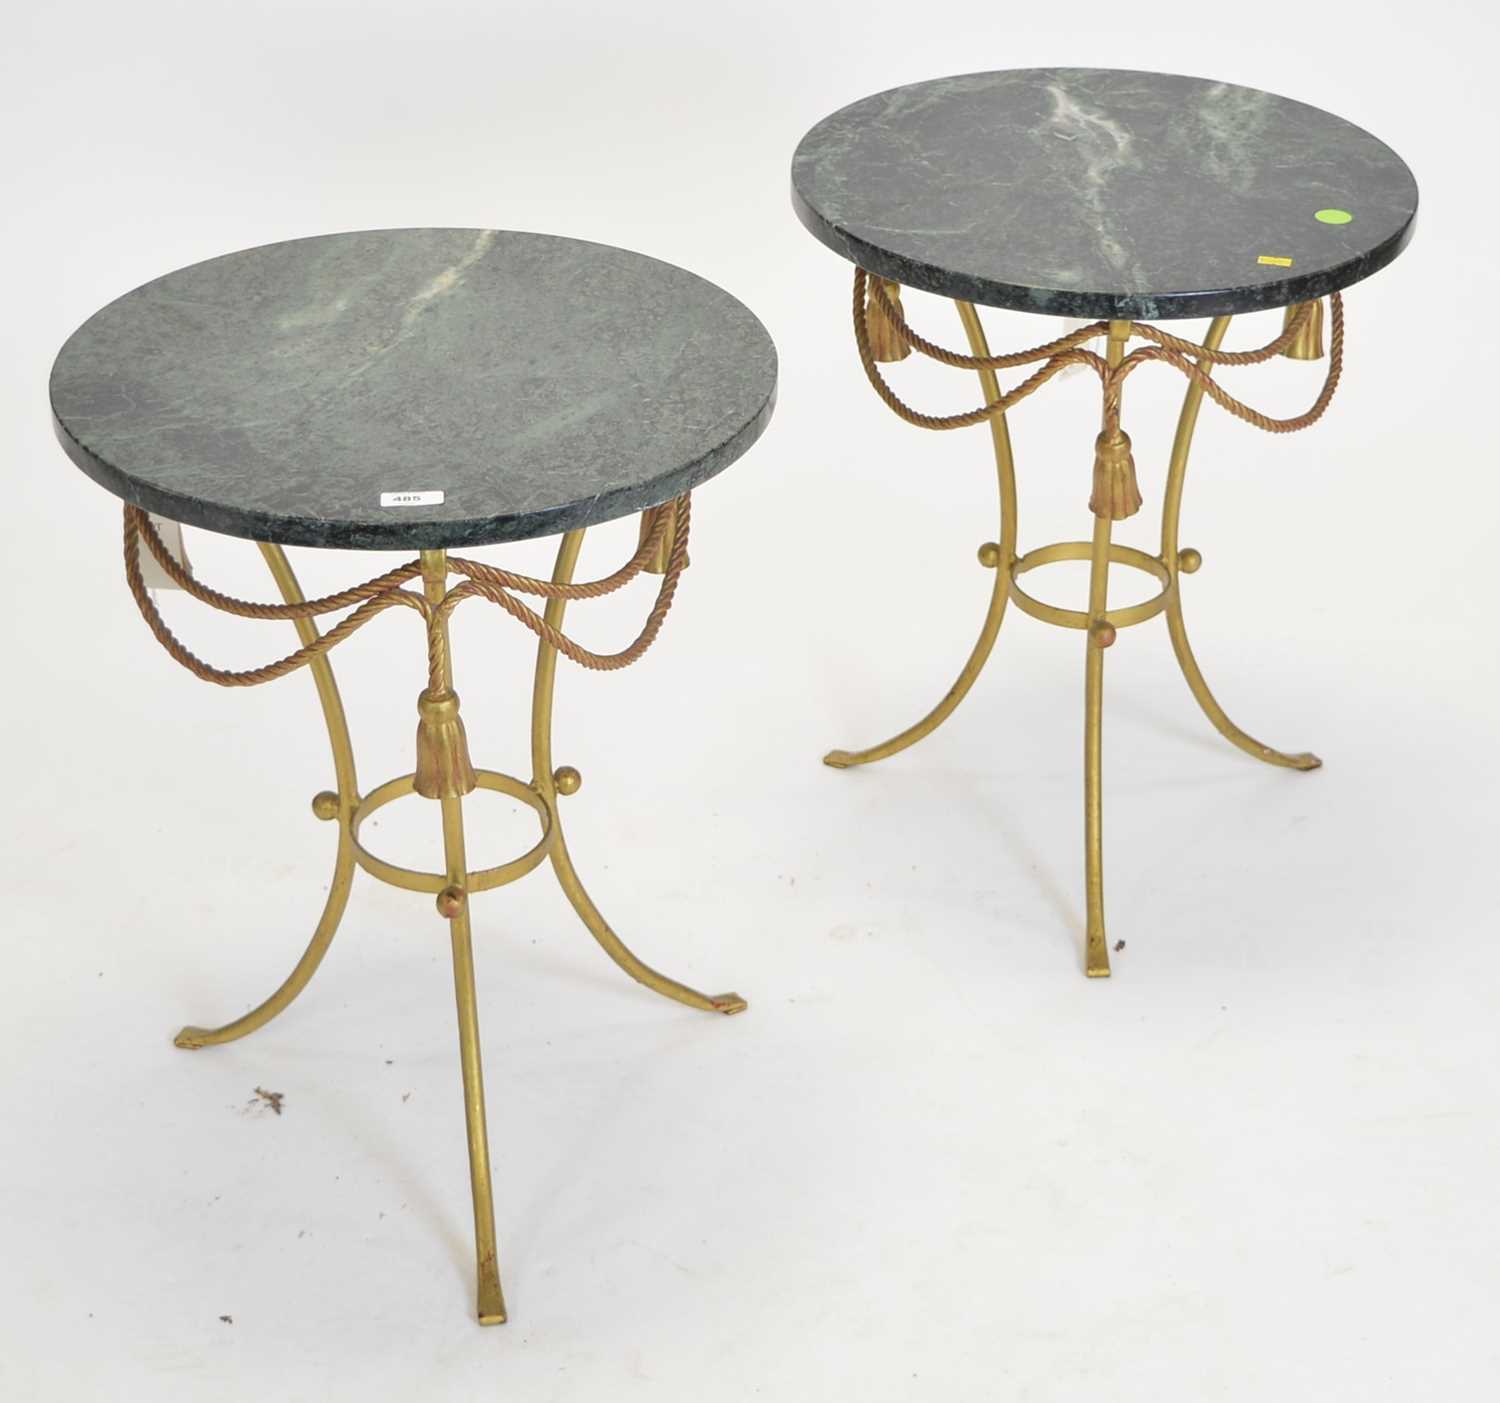 Lot 485 - Pair of 20th Cenutry marble topped tables